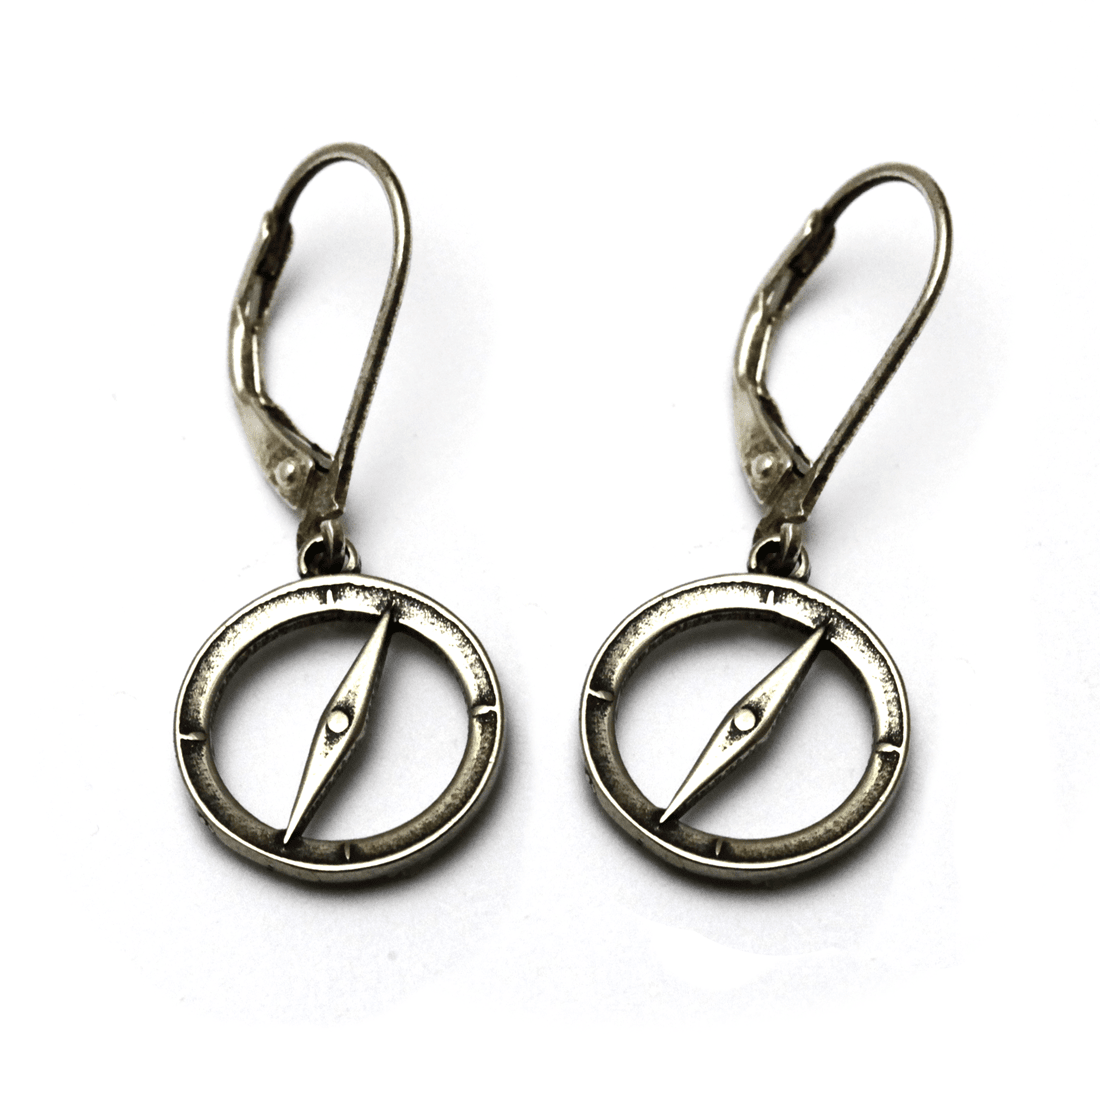 Camping compass earrings in sterling silver 